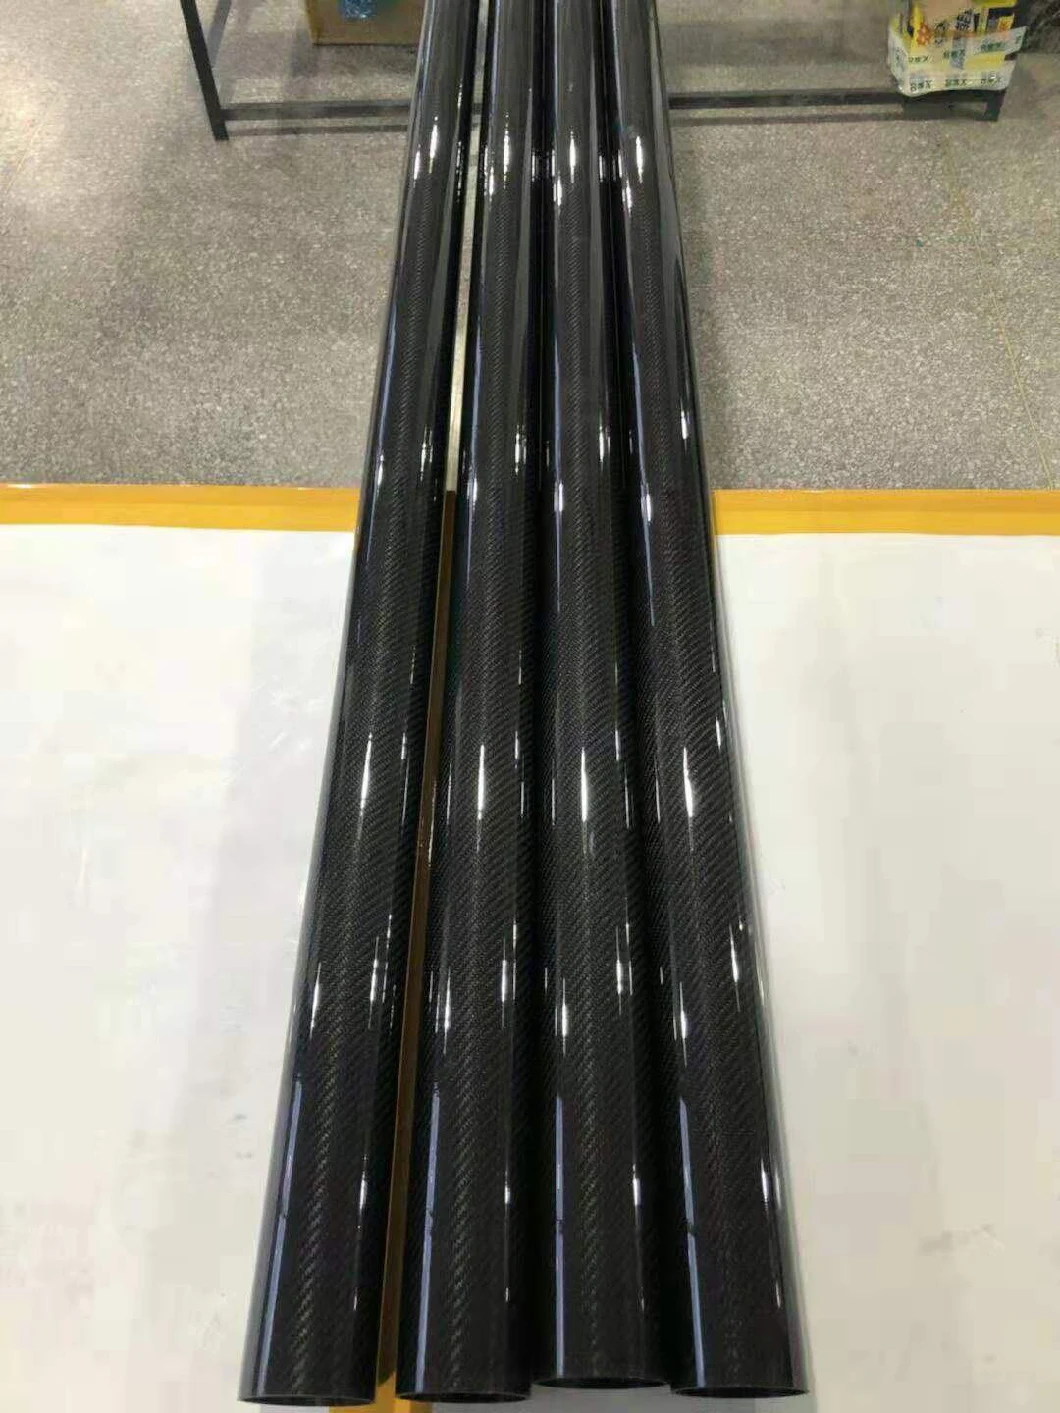 Roll Wrapped 8000mm 3K Plain/Glossy/Matte Carbon Fiber Tube Made in China